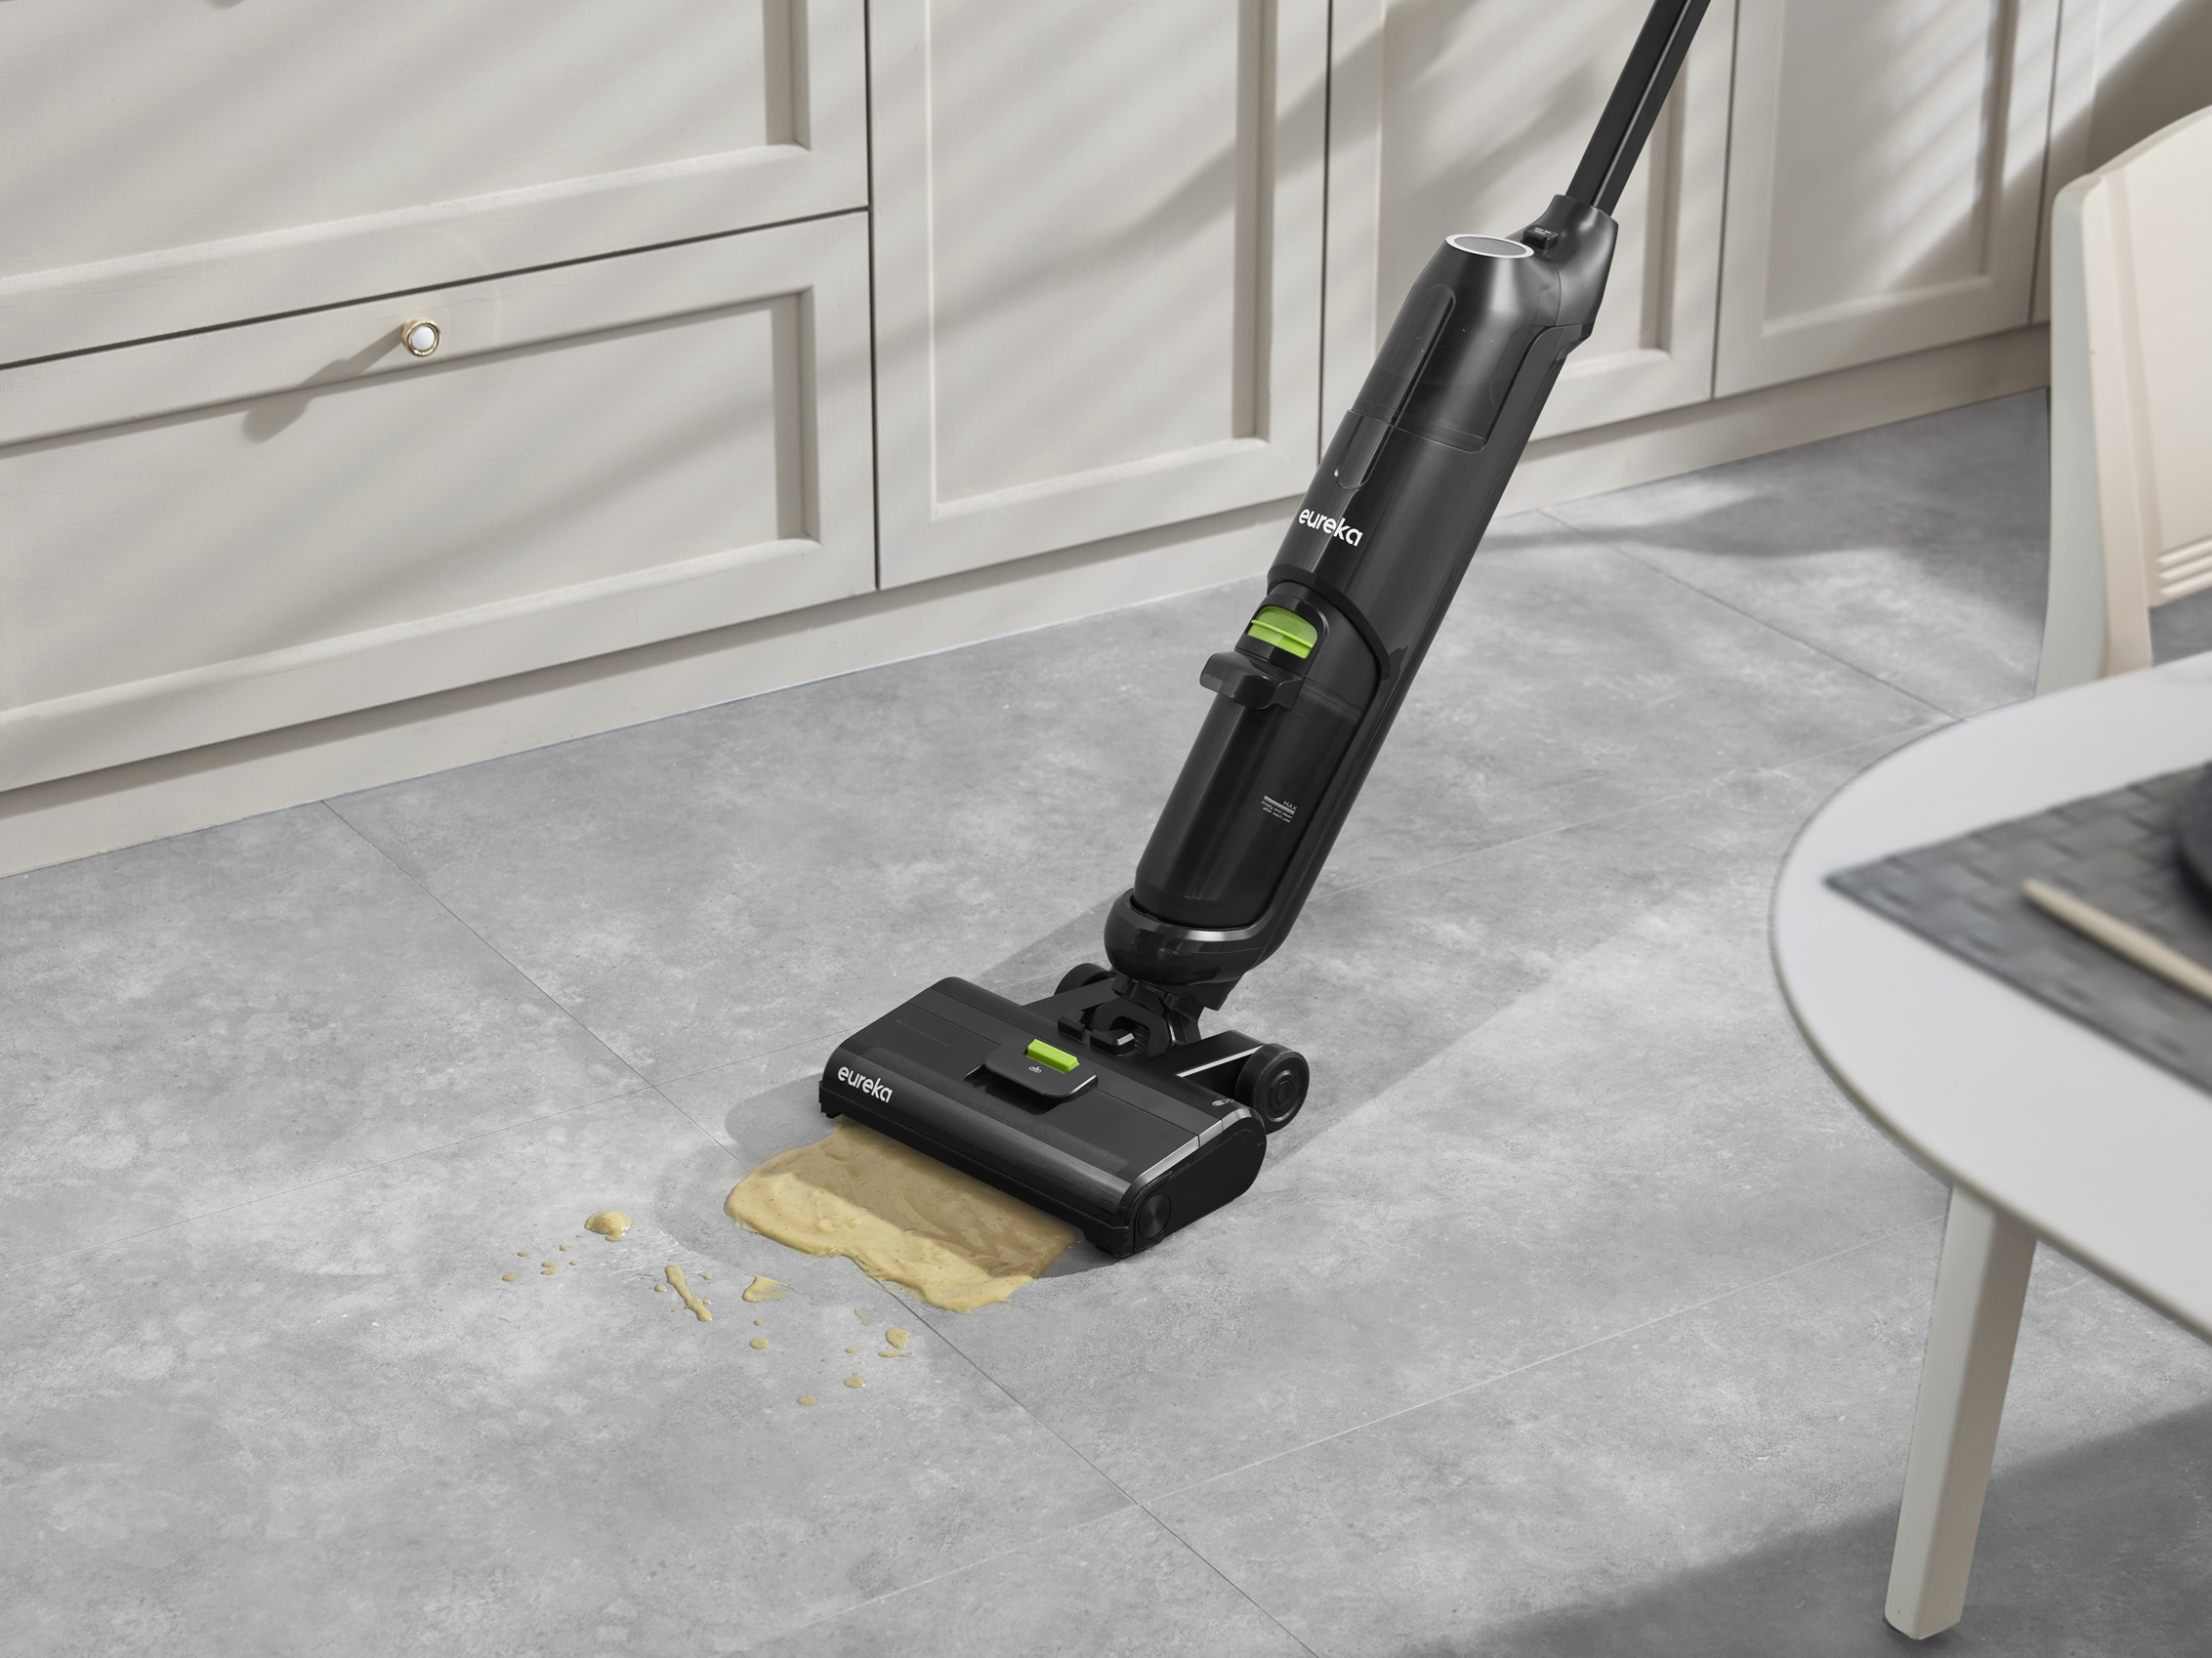 https://www.digitaltrends.com/wp-content/uploads/2023/11/Eureka-NEW400-cleaning-spill-in-kitchen.jpg?fit=720%2C539&p=1